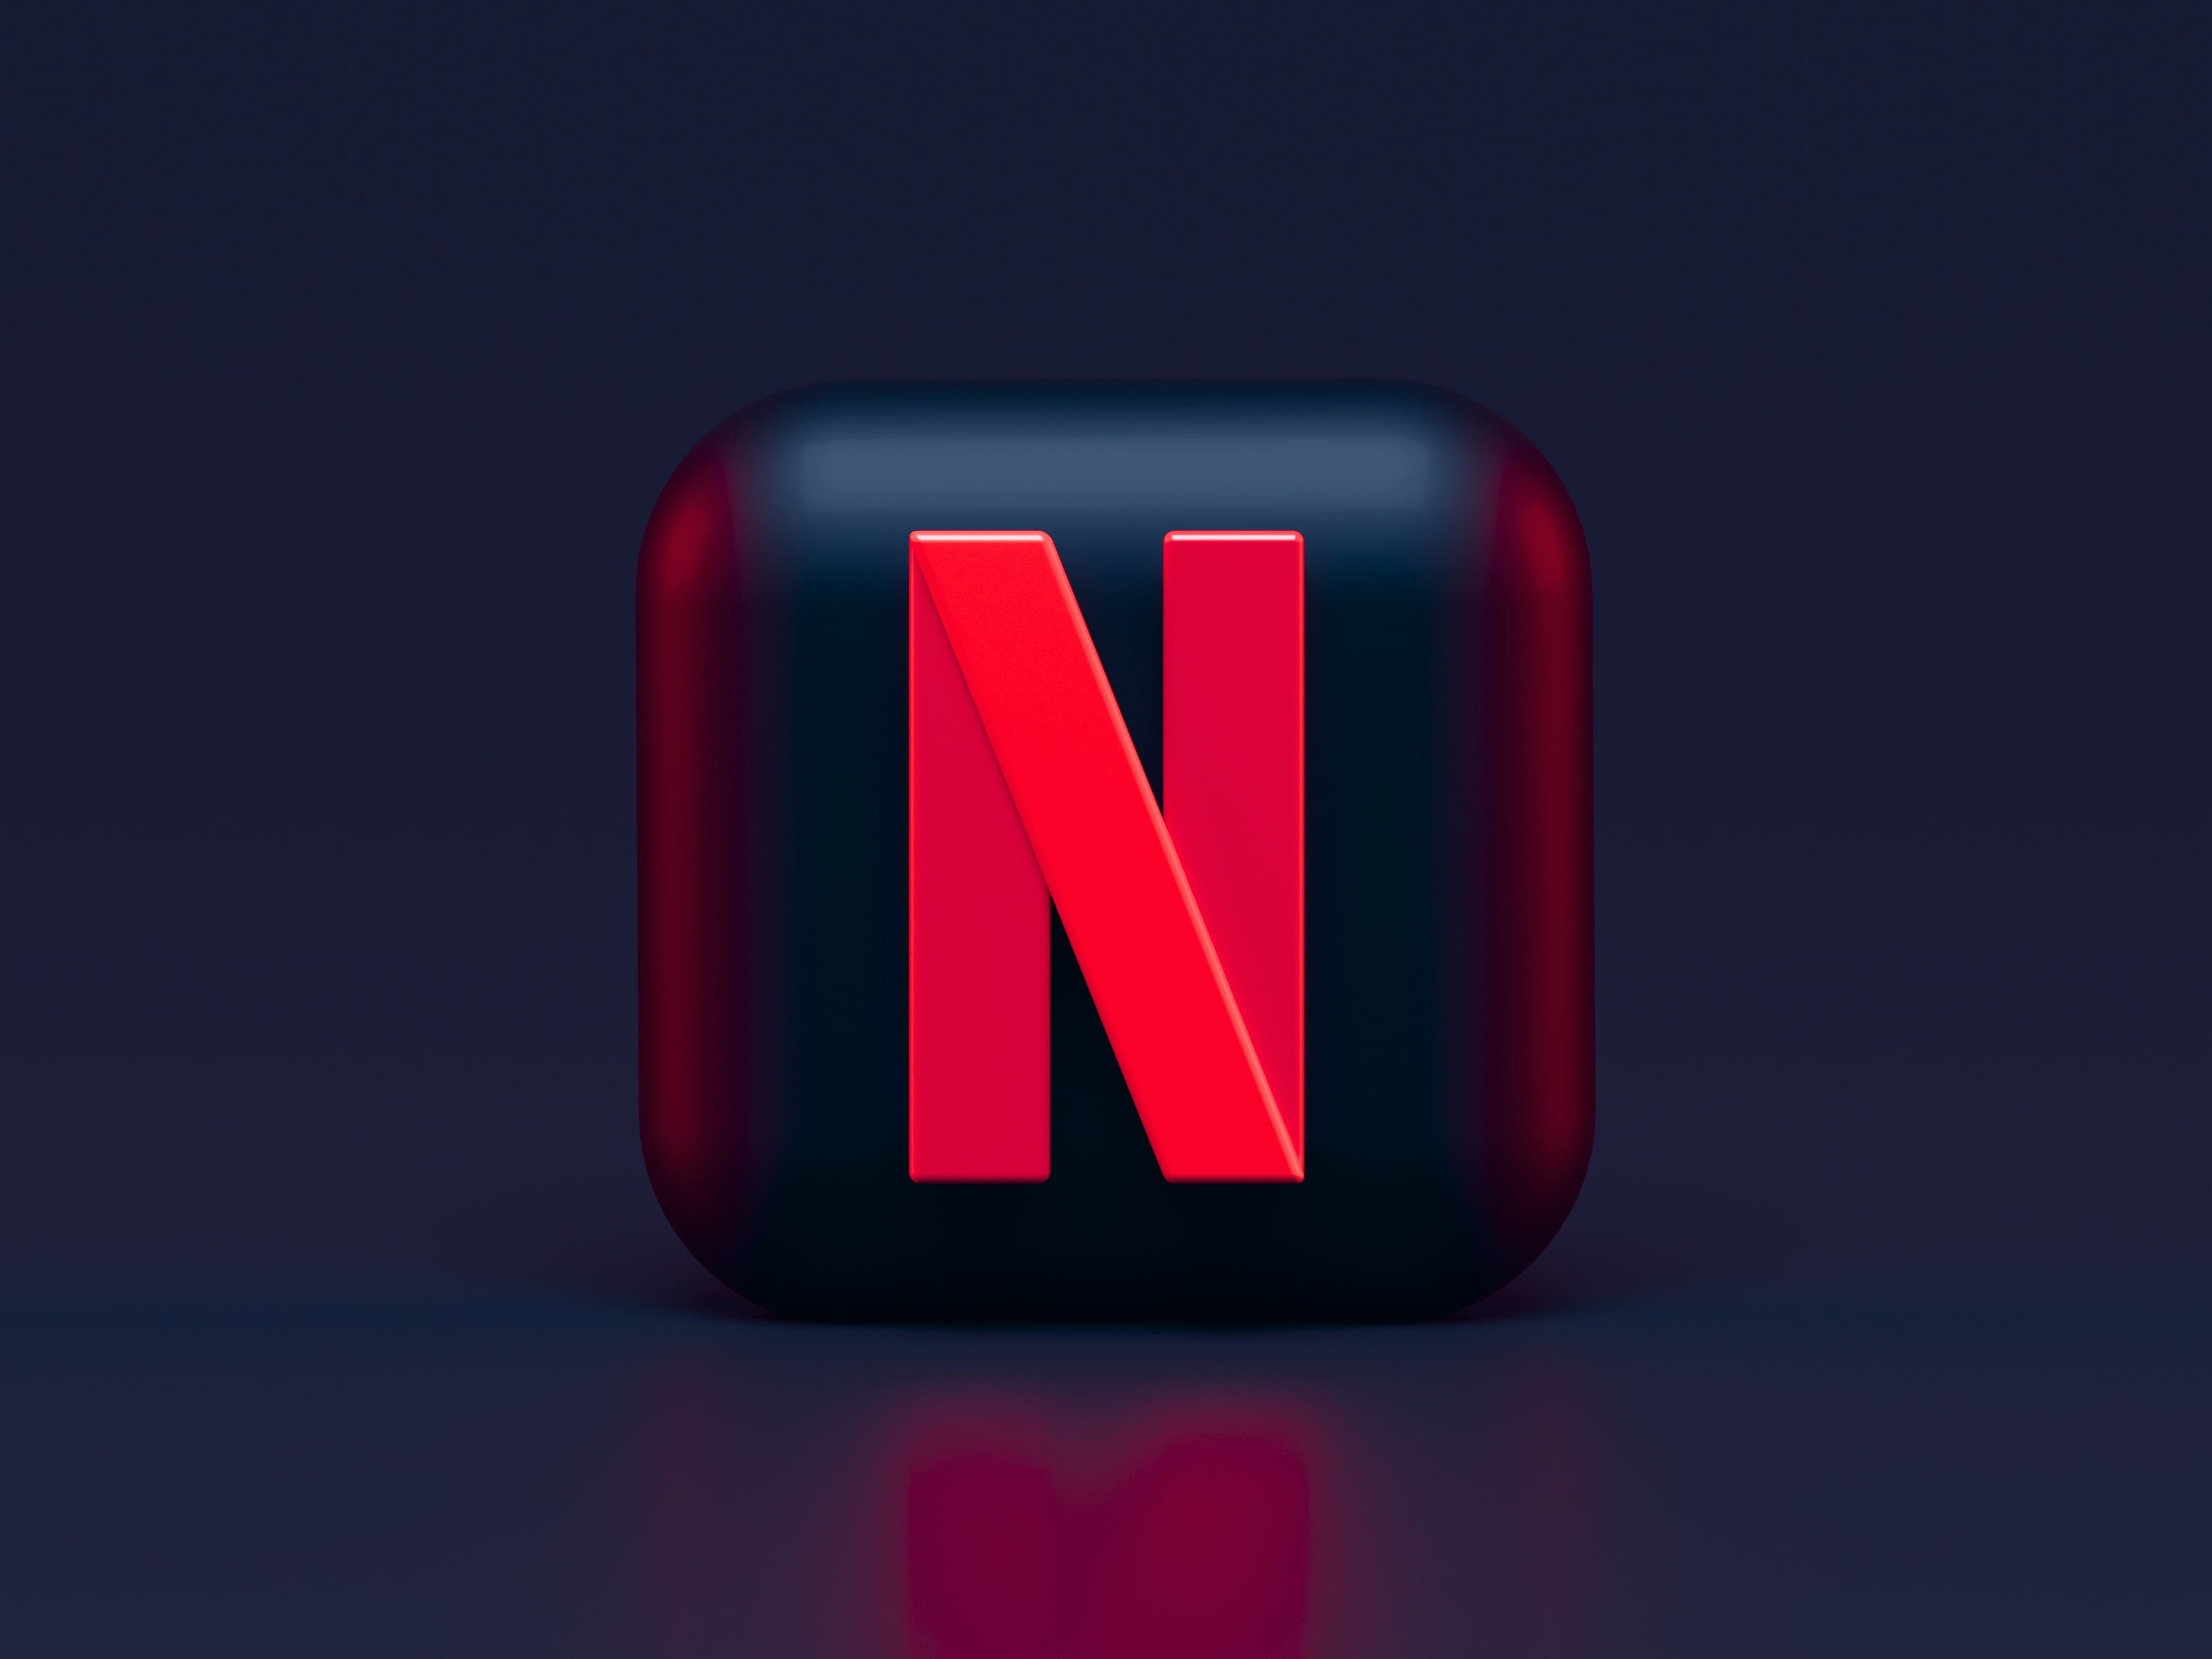 How Netflix Is Preparing To Combat The 'Lighter Content Slate' That Affected Q1 Growth